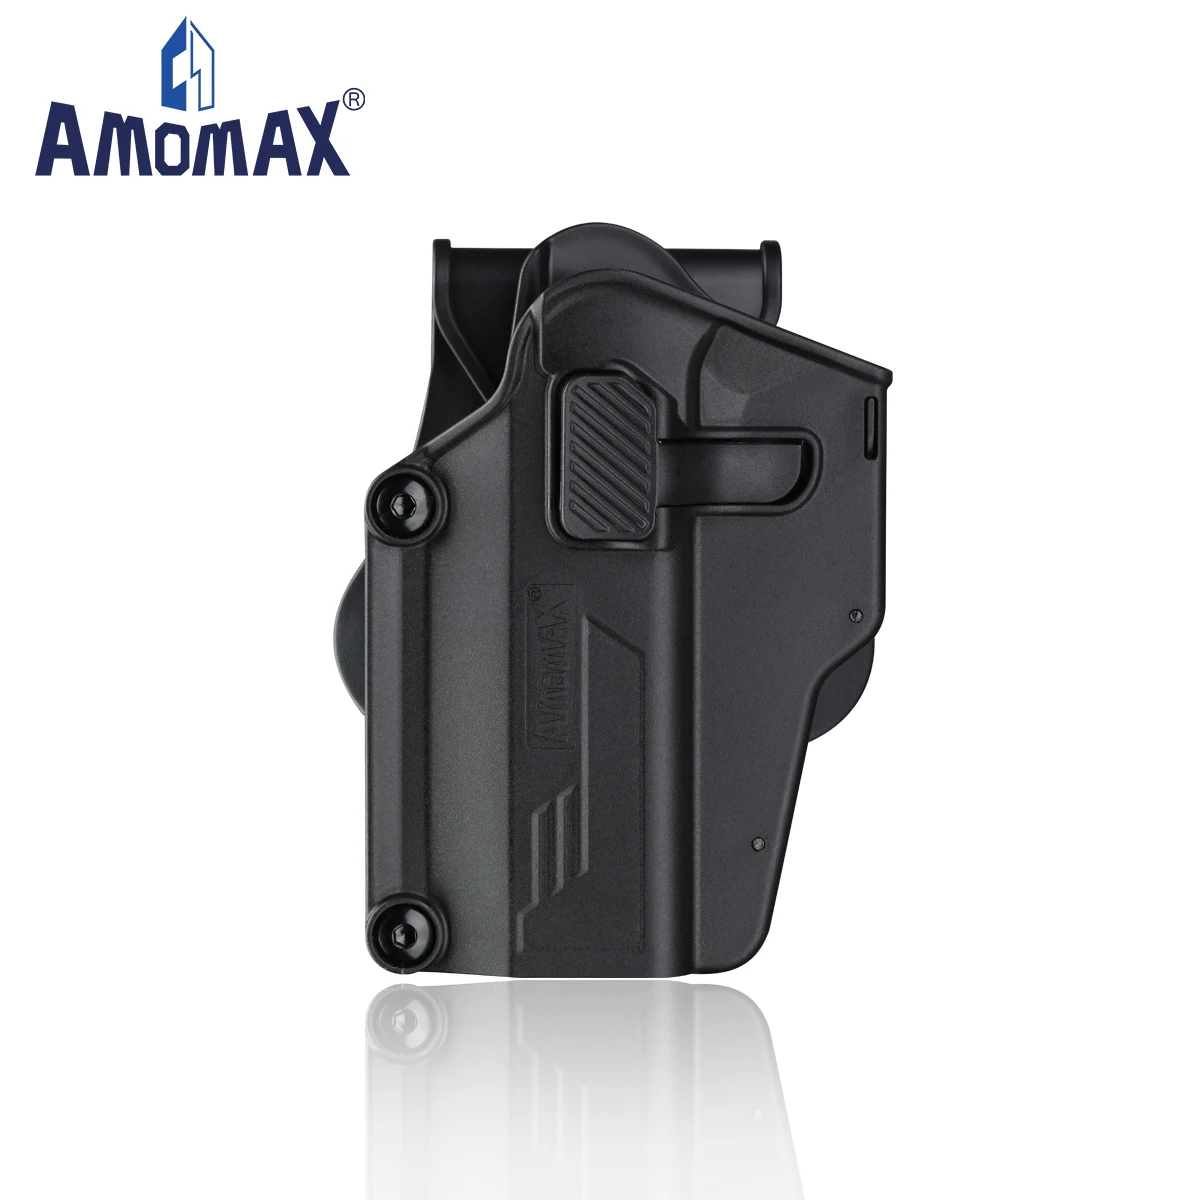 

Amomax Per Fit Tactical Plastic Premium Left Handed Universal Gun Holsters for Glock Smith & Wesson Sig Sauer Beretta CZ Taurus, Black/fde/od green